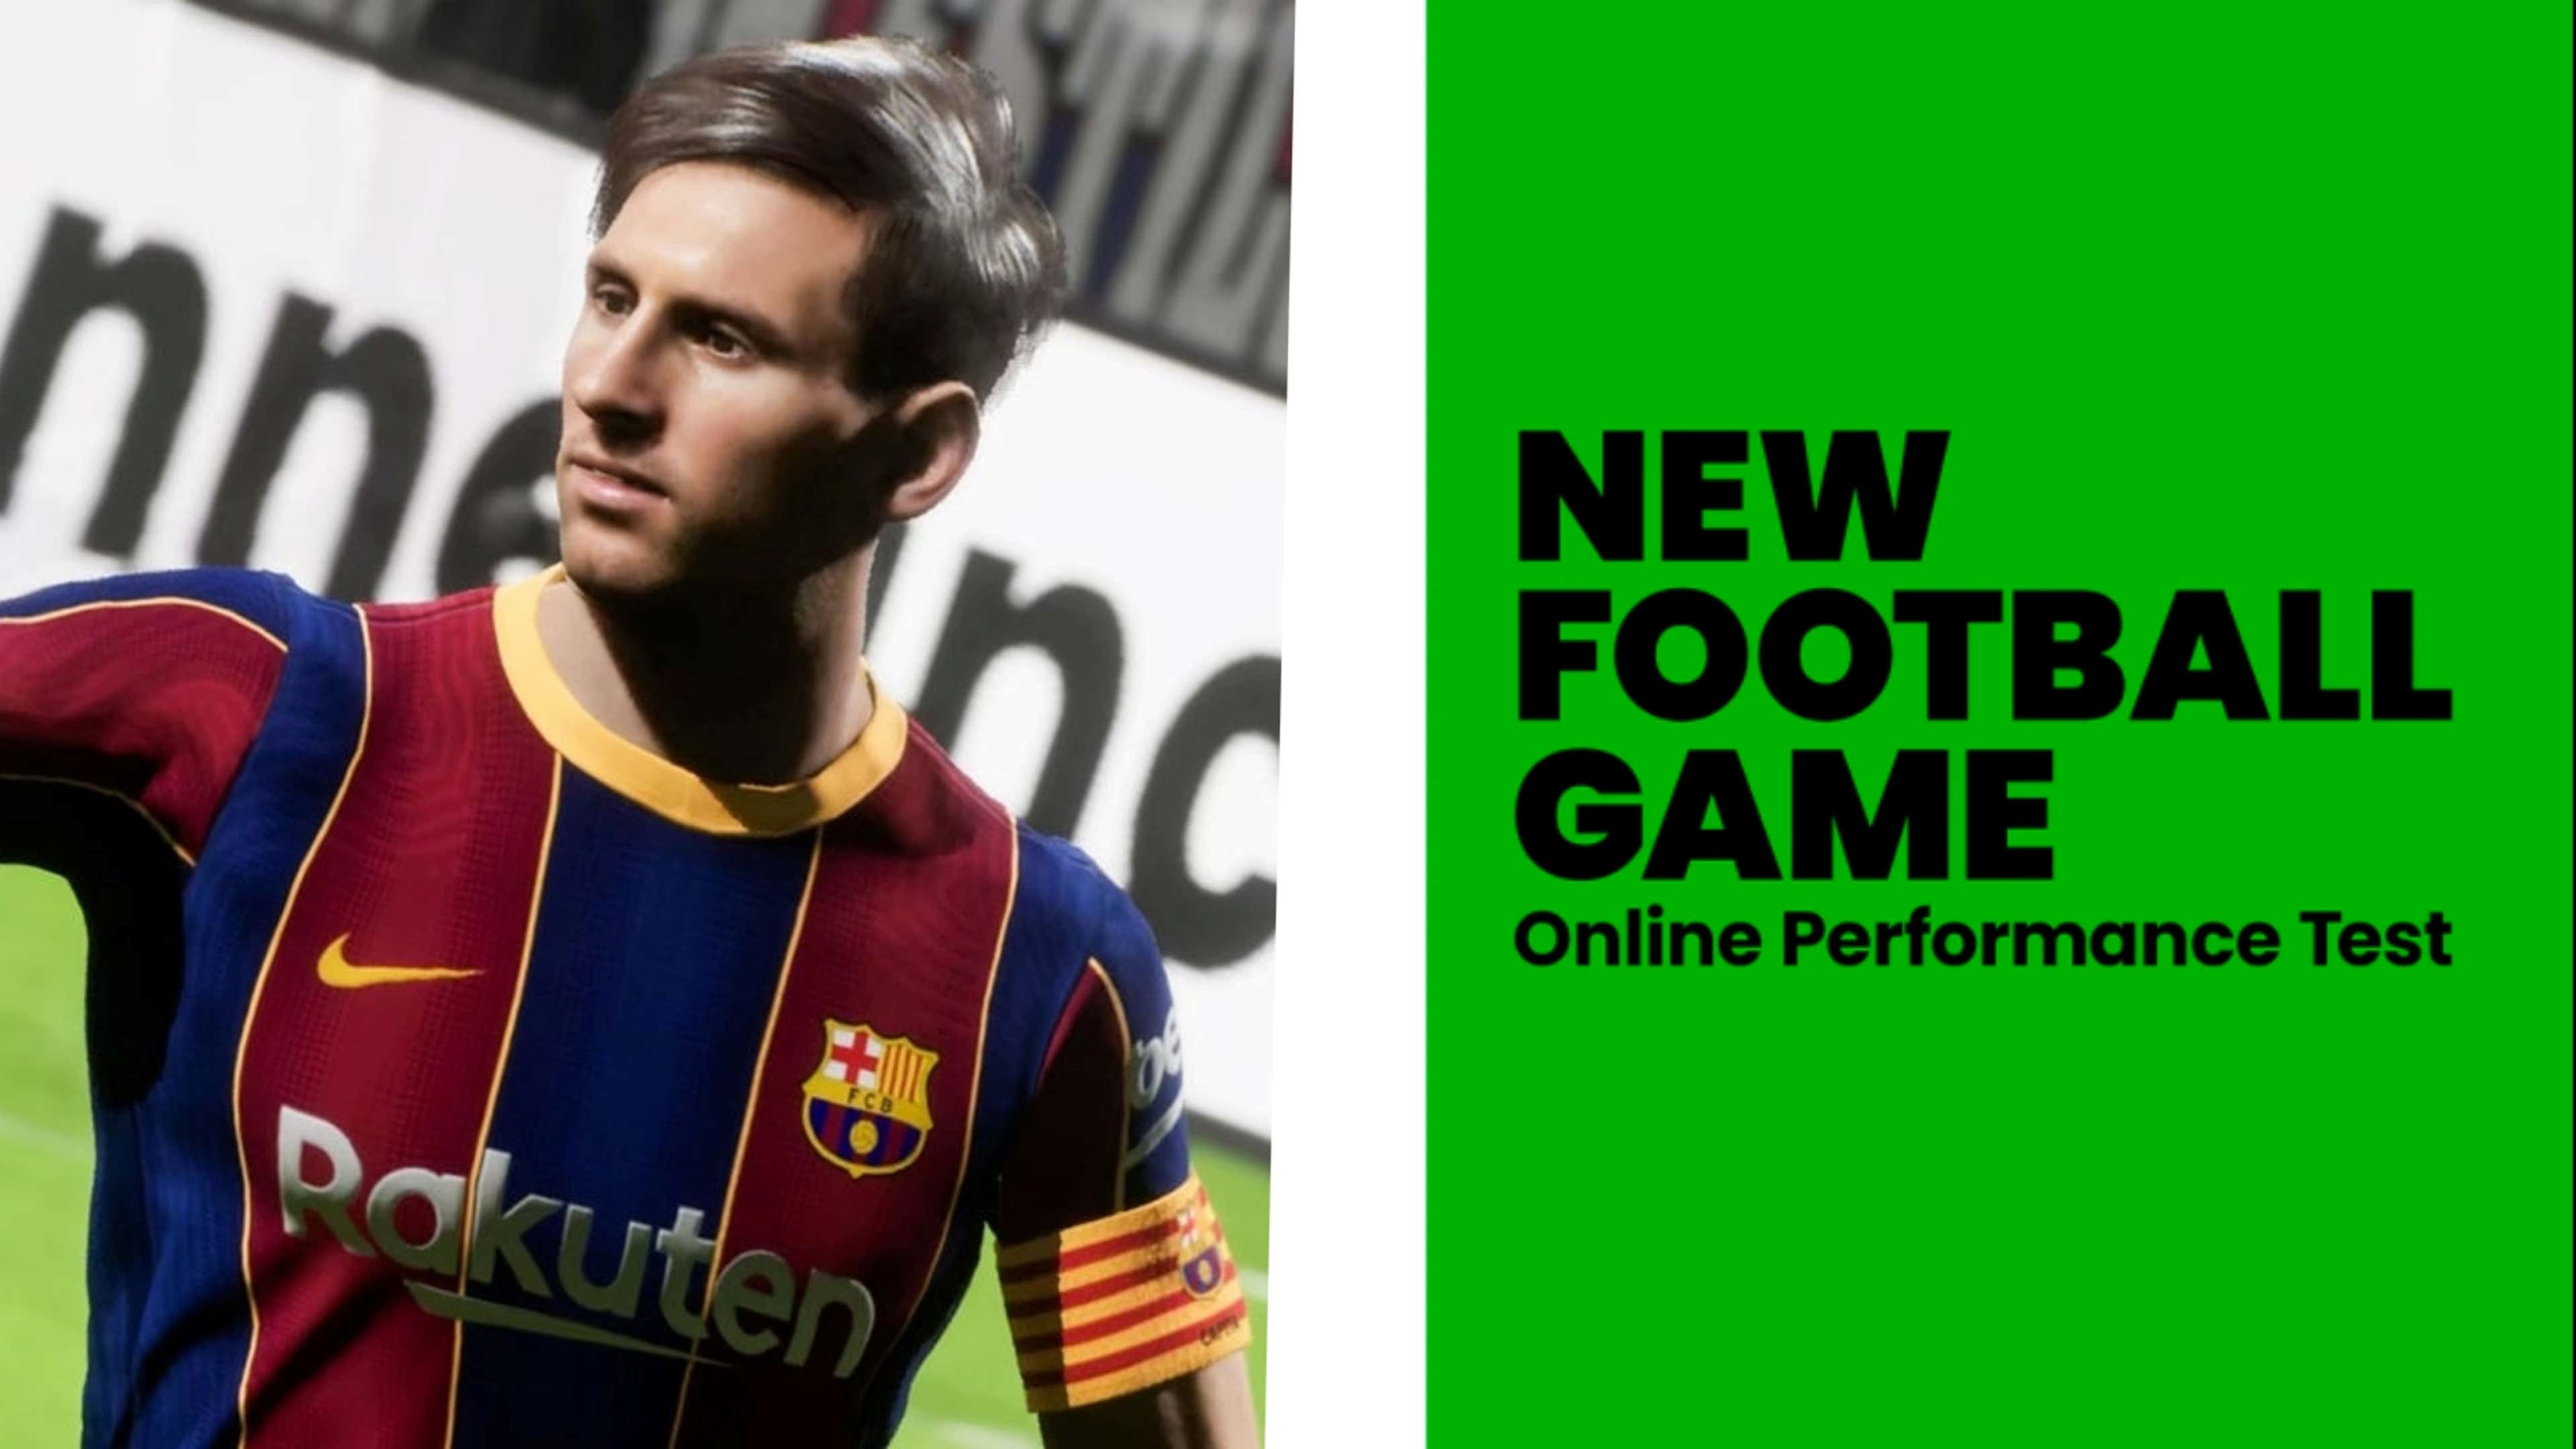 Download PES 2012 demo for Windows 